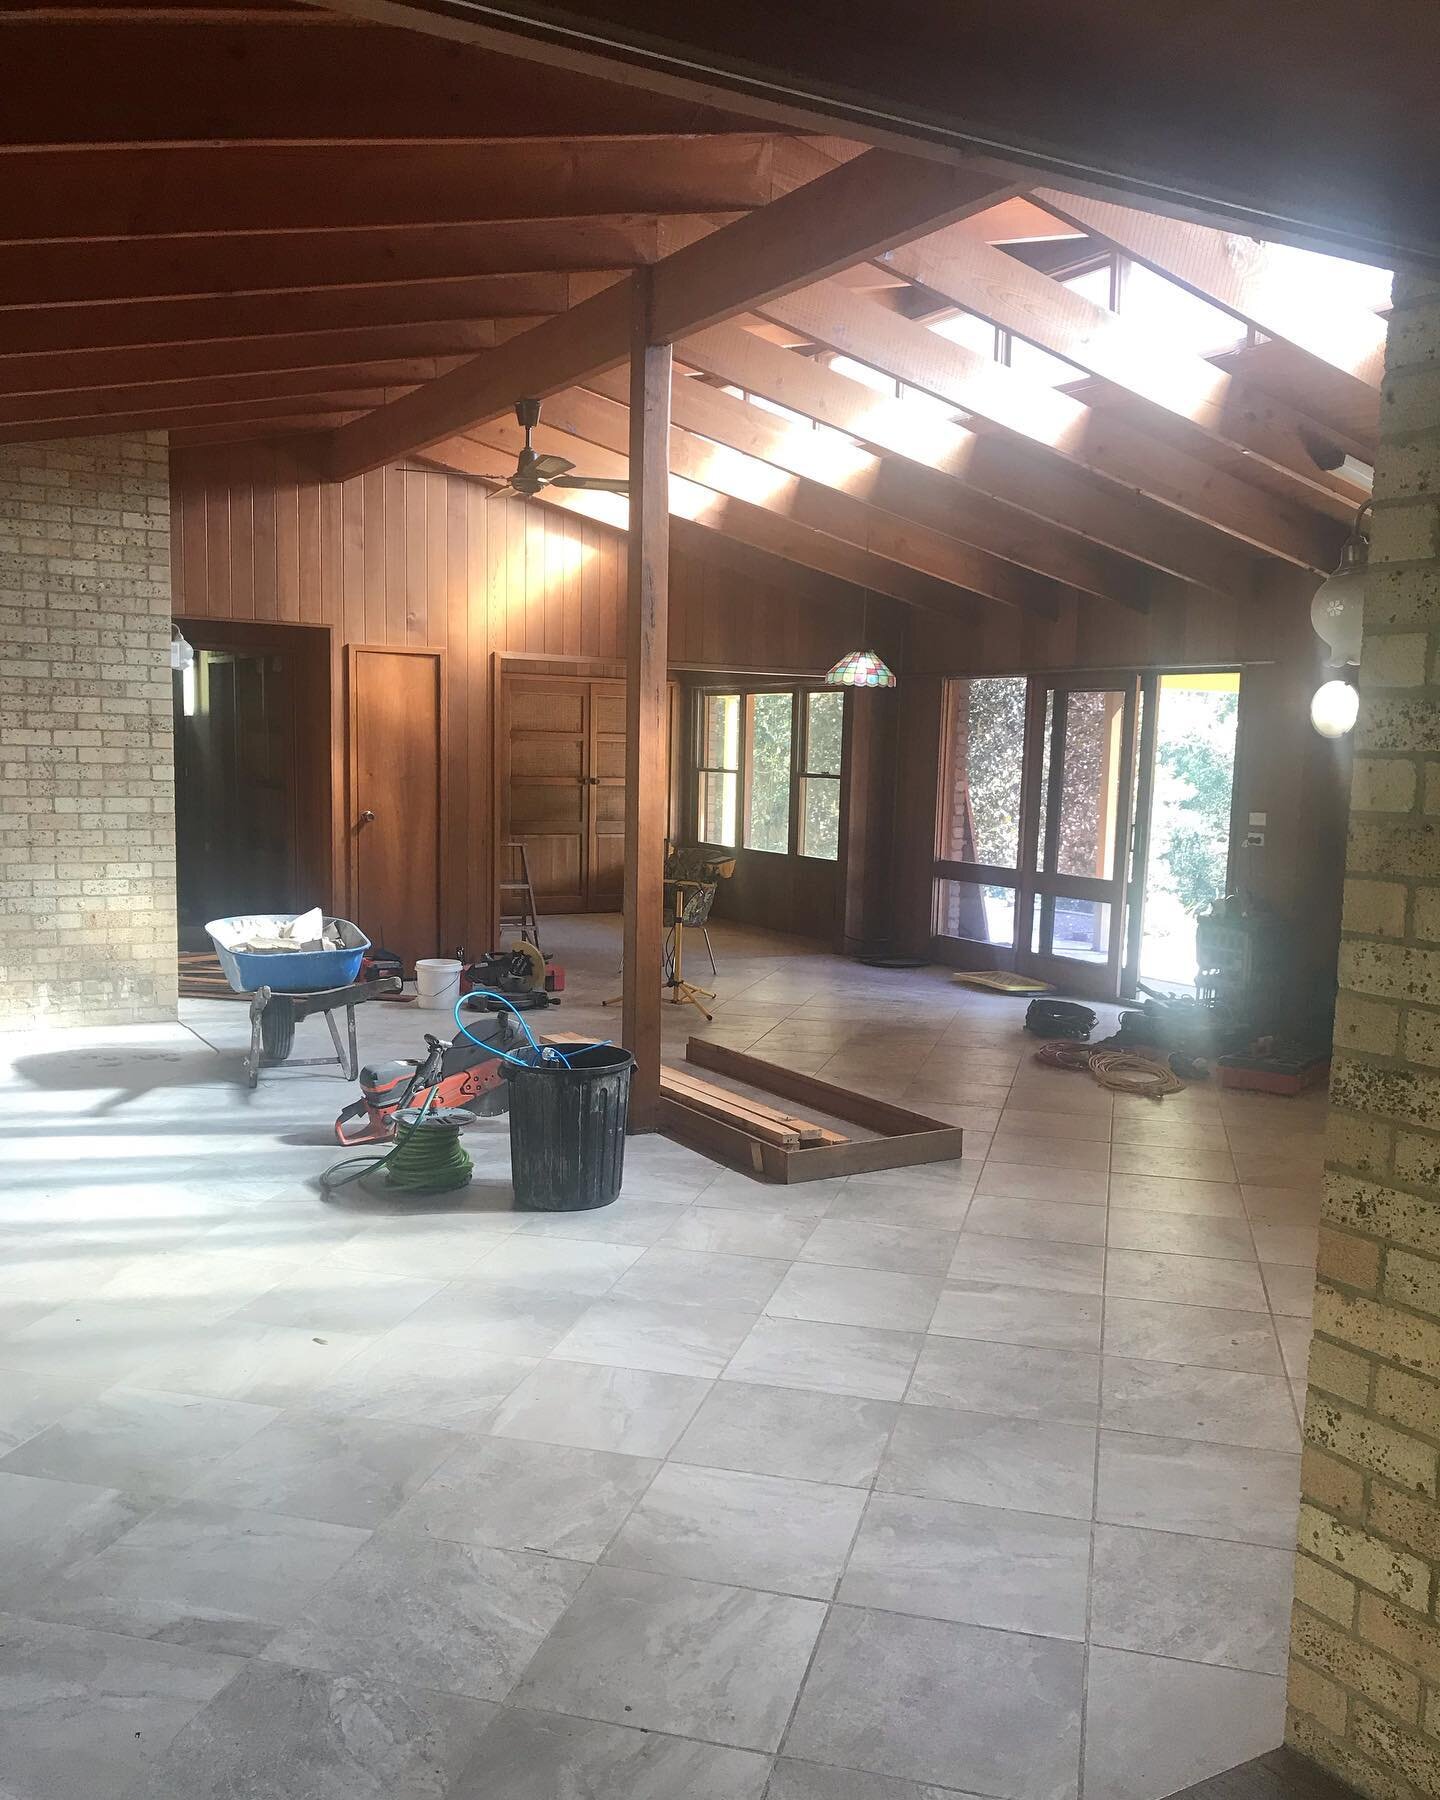 Very excited about the next renovation. Watch this space. .
.
.
.
#renovation #austinmer #realestate #familyhouse #rennovation #bulider #builderwollongong #buildersouthcoastnsw #buildersydney #builderilawarra #newhome #uniquehome #custombuild #loft #